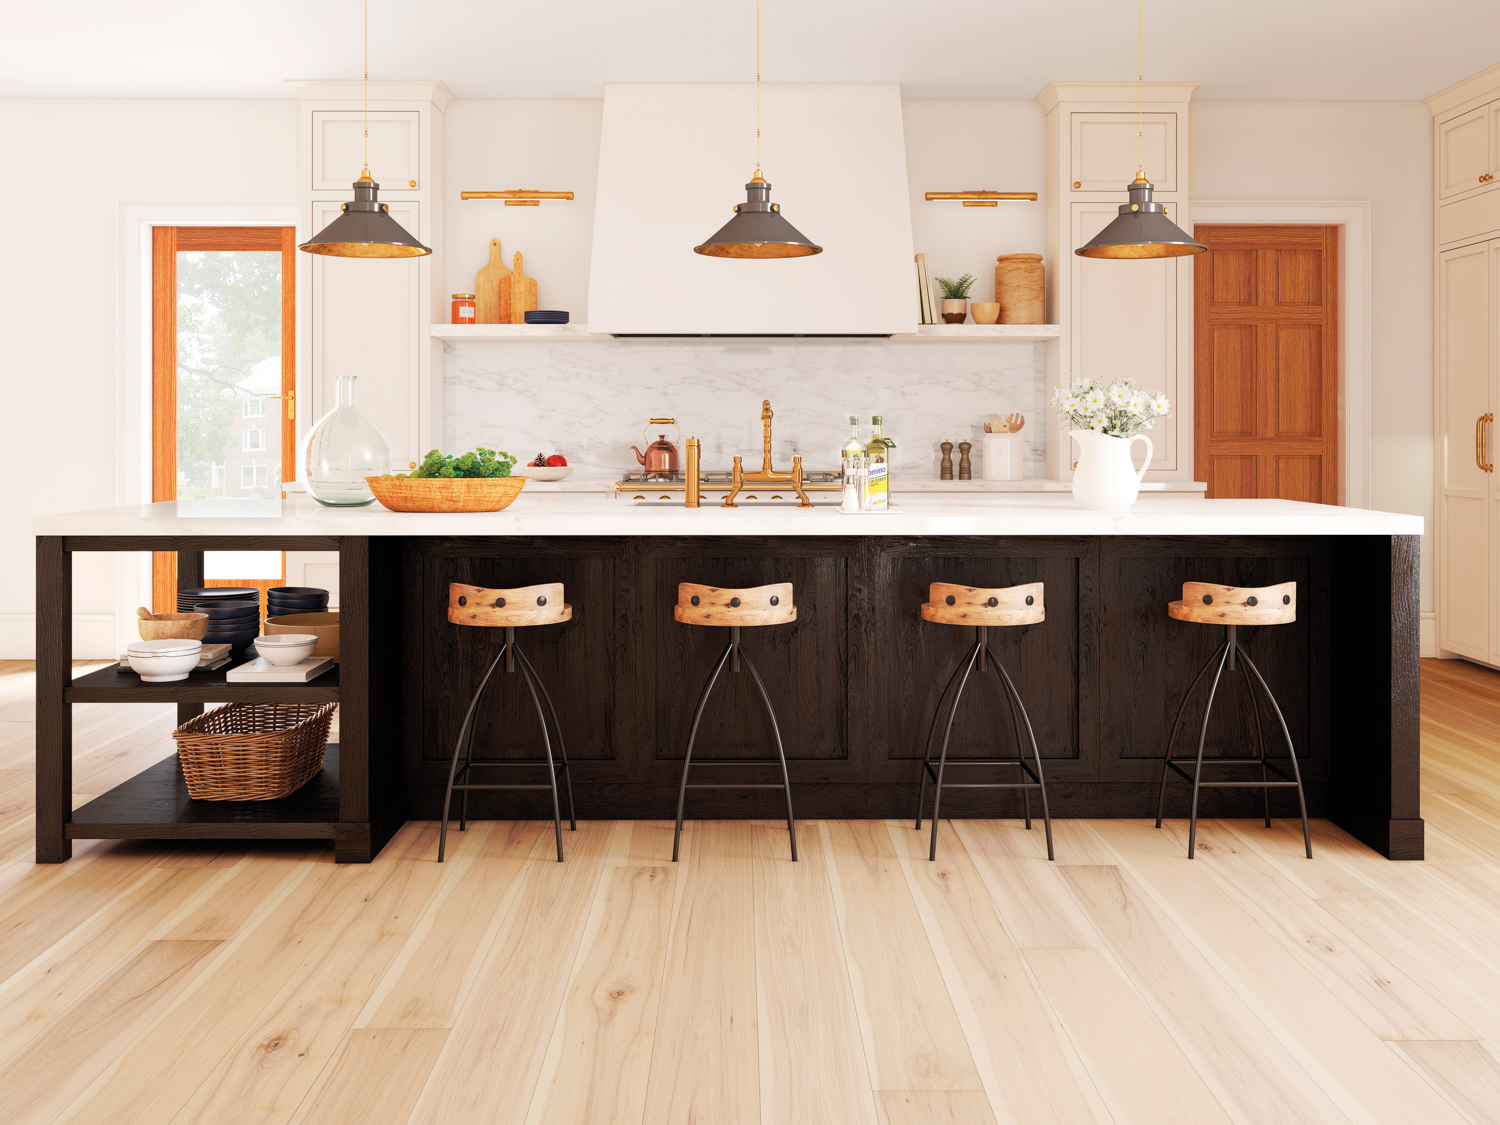 Kitchen with light wood floors, black island and white countertops